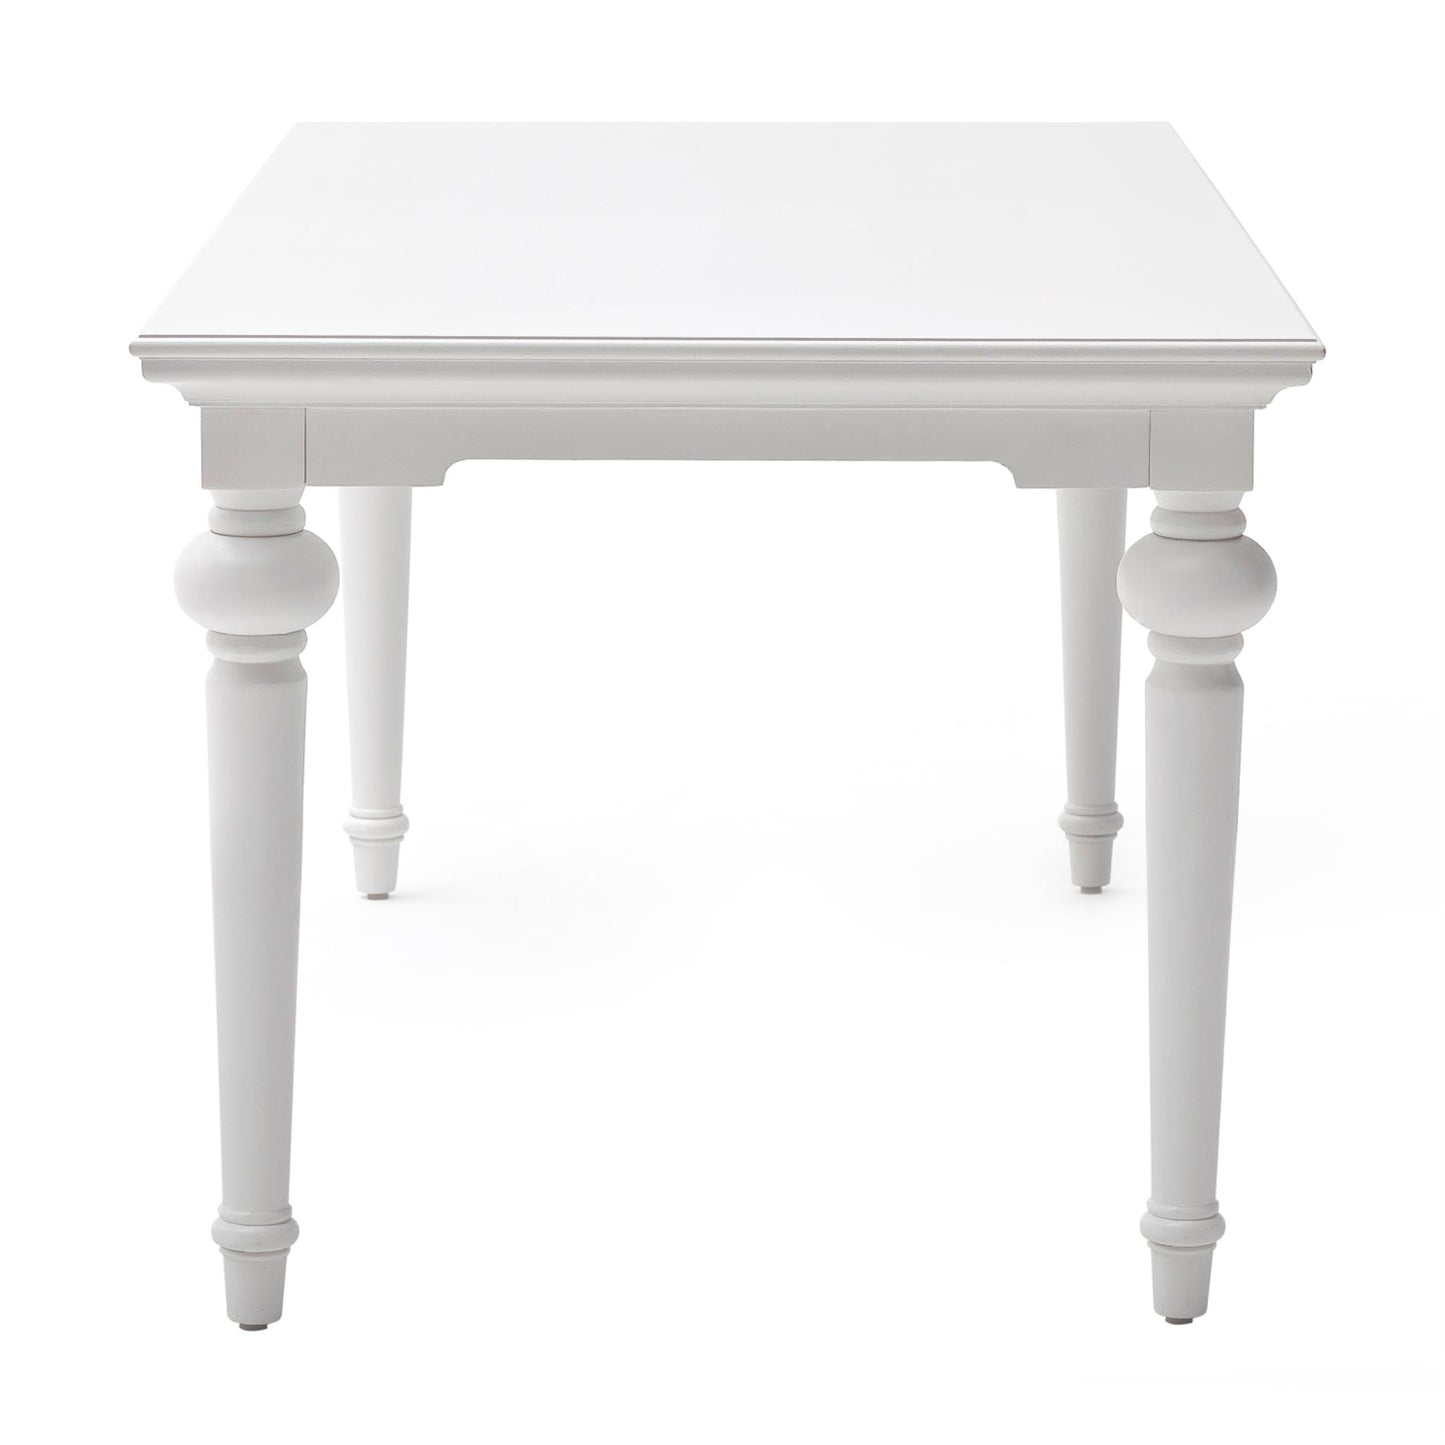 Provence collection by Nova Solo.  71" Dining Table CasaFenix